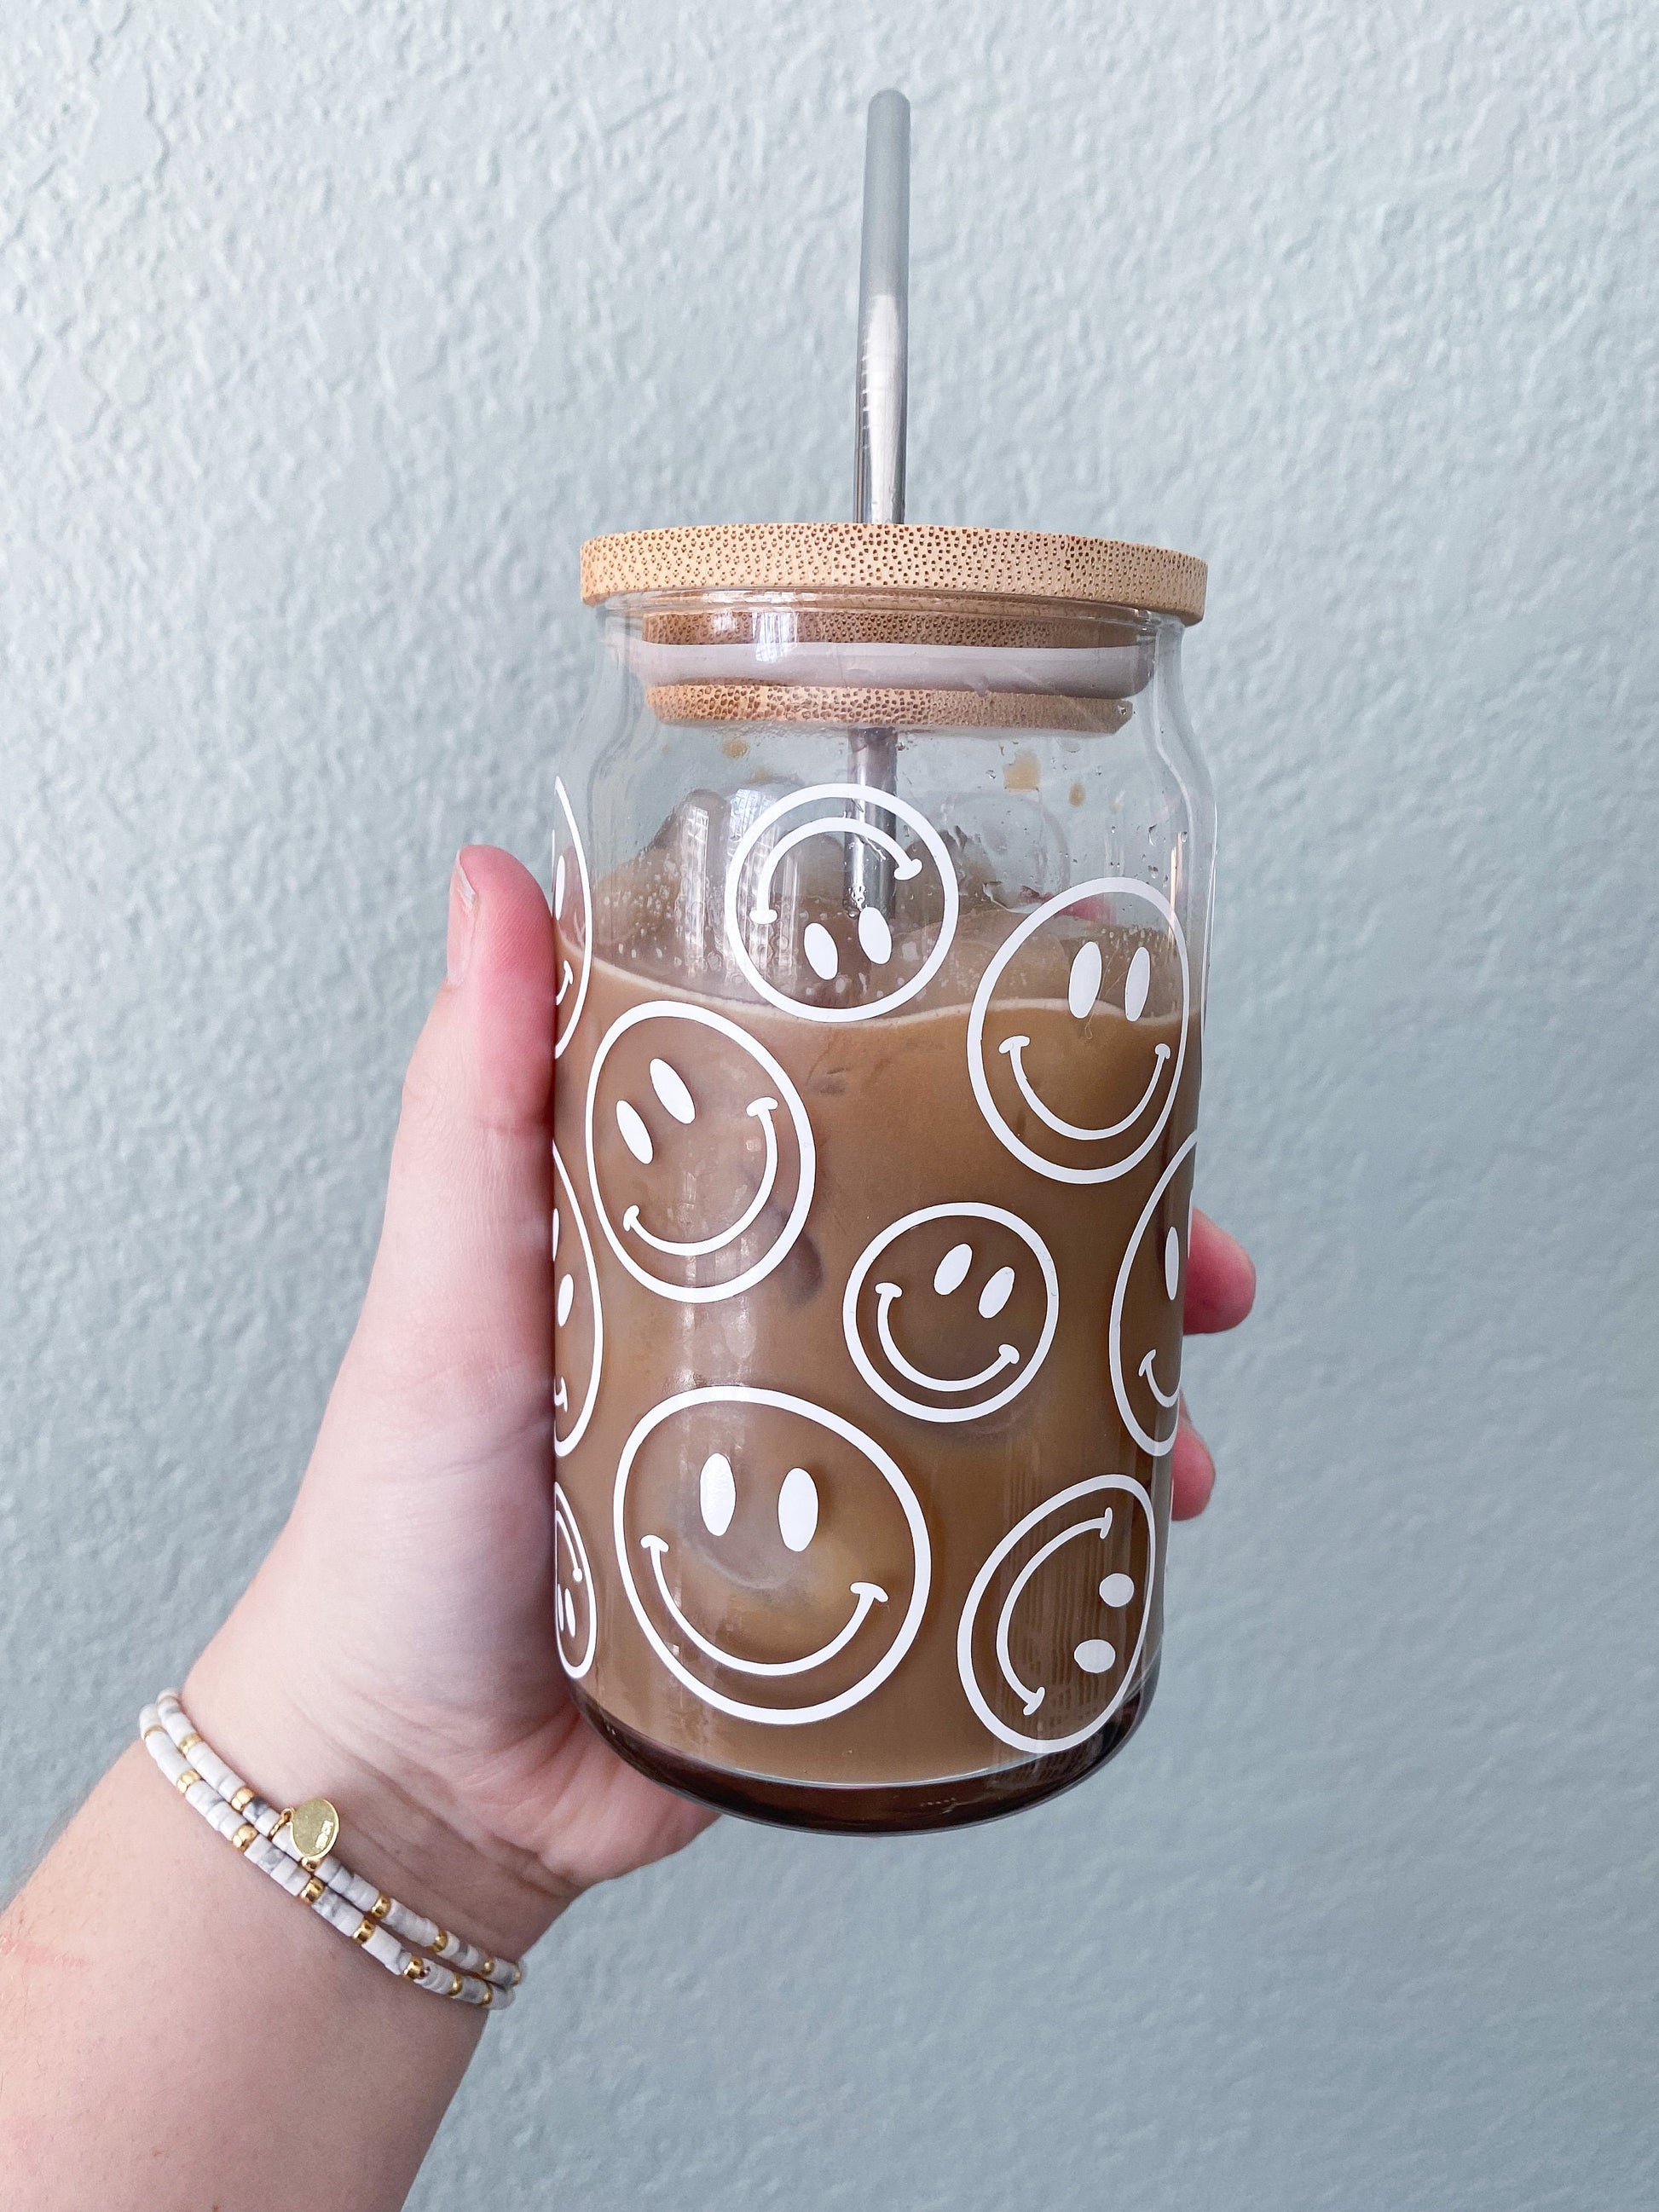 Smiley Face Glass Cup